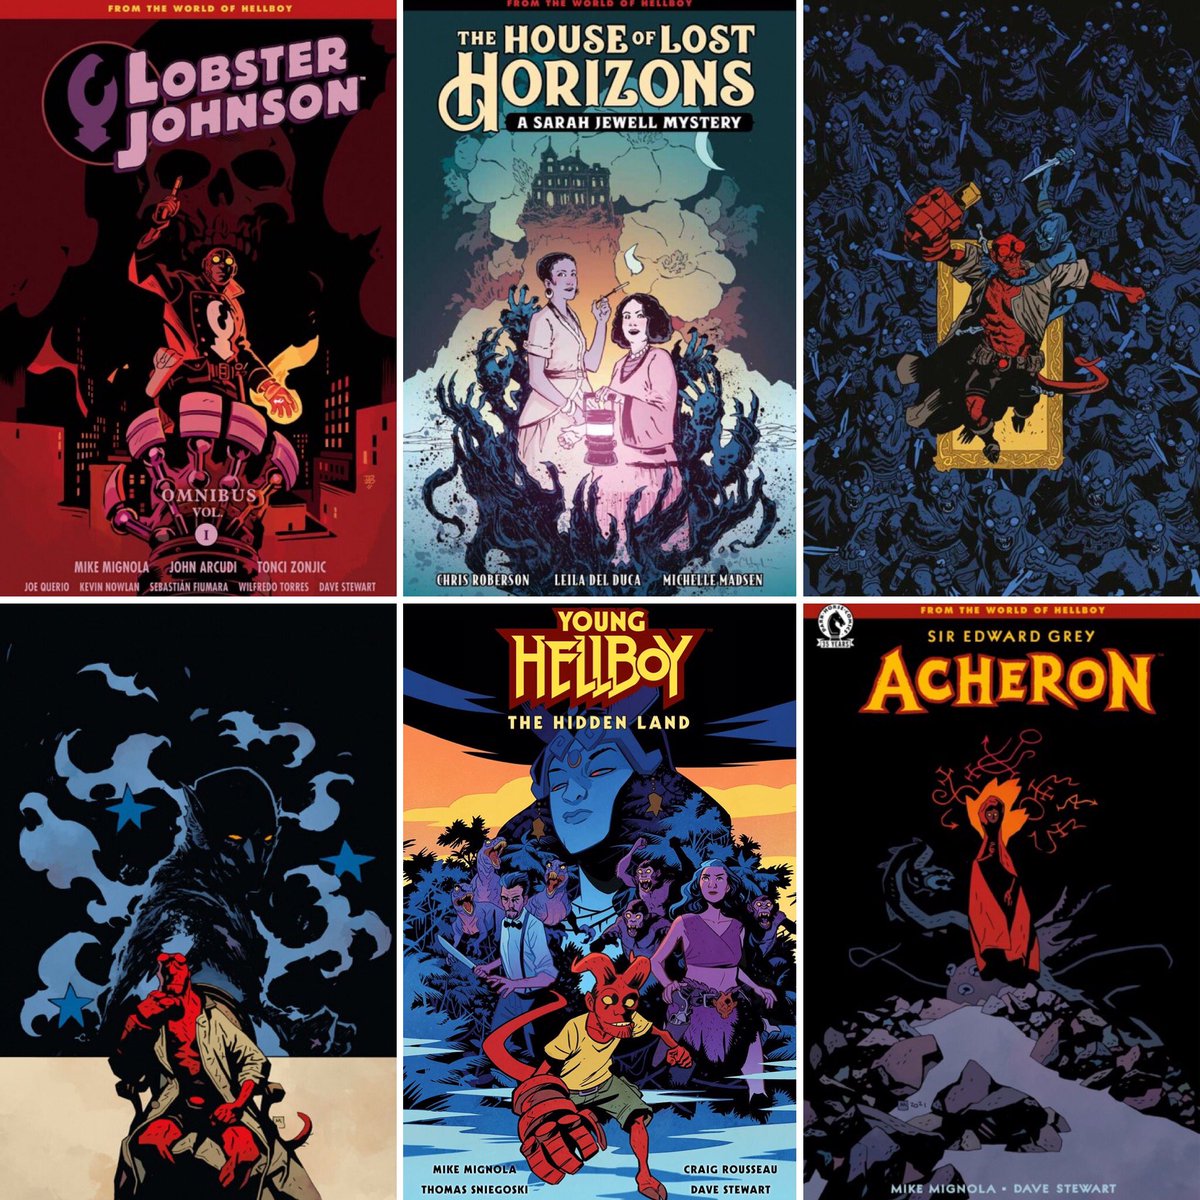 New Episode Today!
podbean.com/ew/pb-58nut-10…
We check out upcoming Hellboy releases with Wes Mattice on this week’s podcast! LINK IN BIO! #hellboybookclub #podcast #hellboy #mikemignola #toncizonjic #christophermitten #leiladelduca